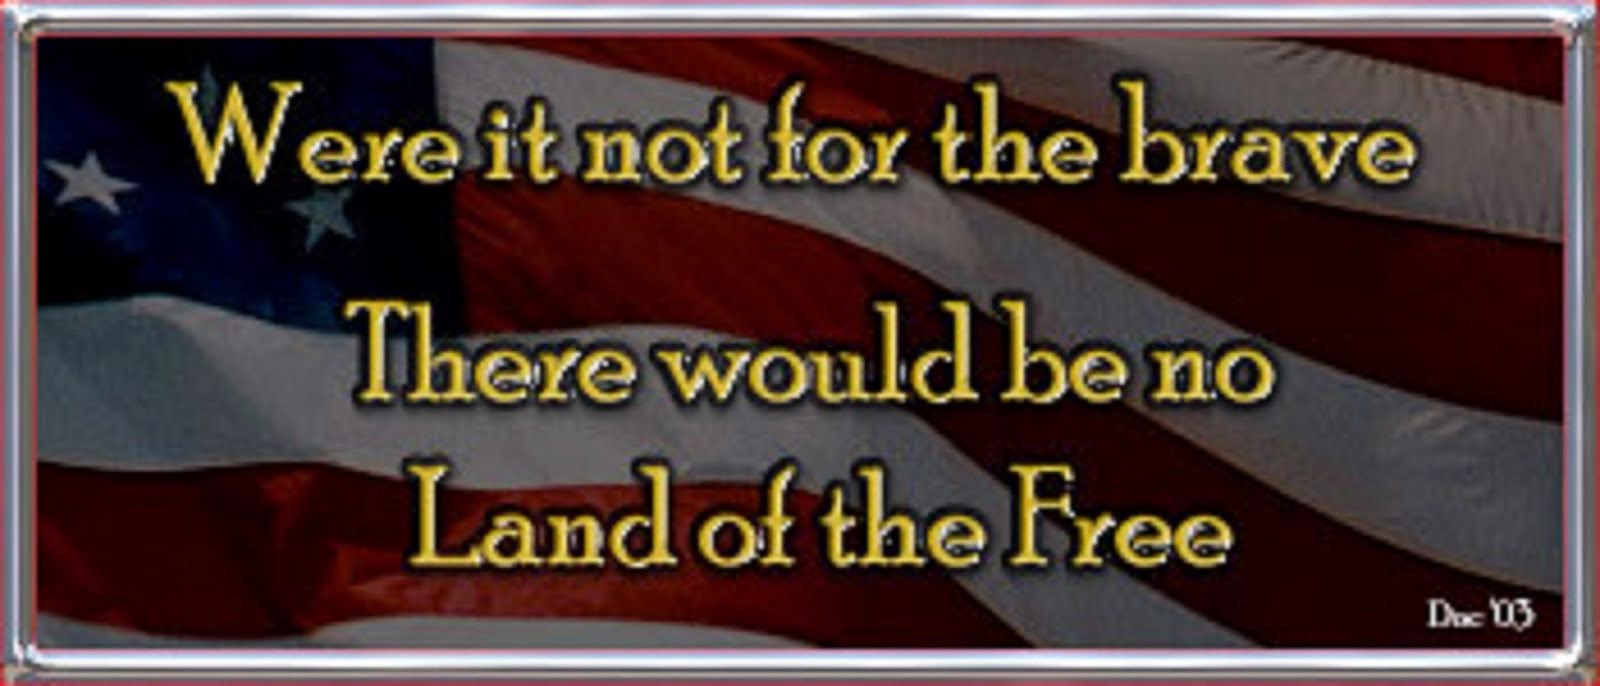 WERE IT NOT FOR THE BRAVE THERE WOULD BE NO LAND OF THE FREE